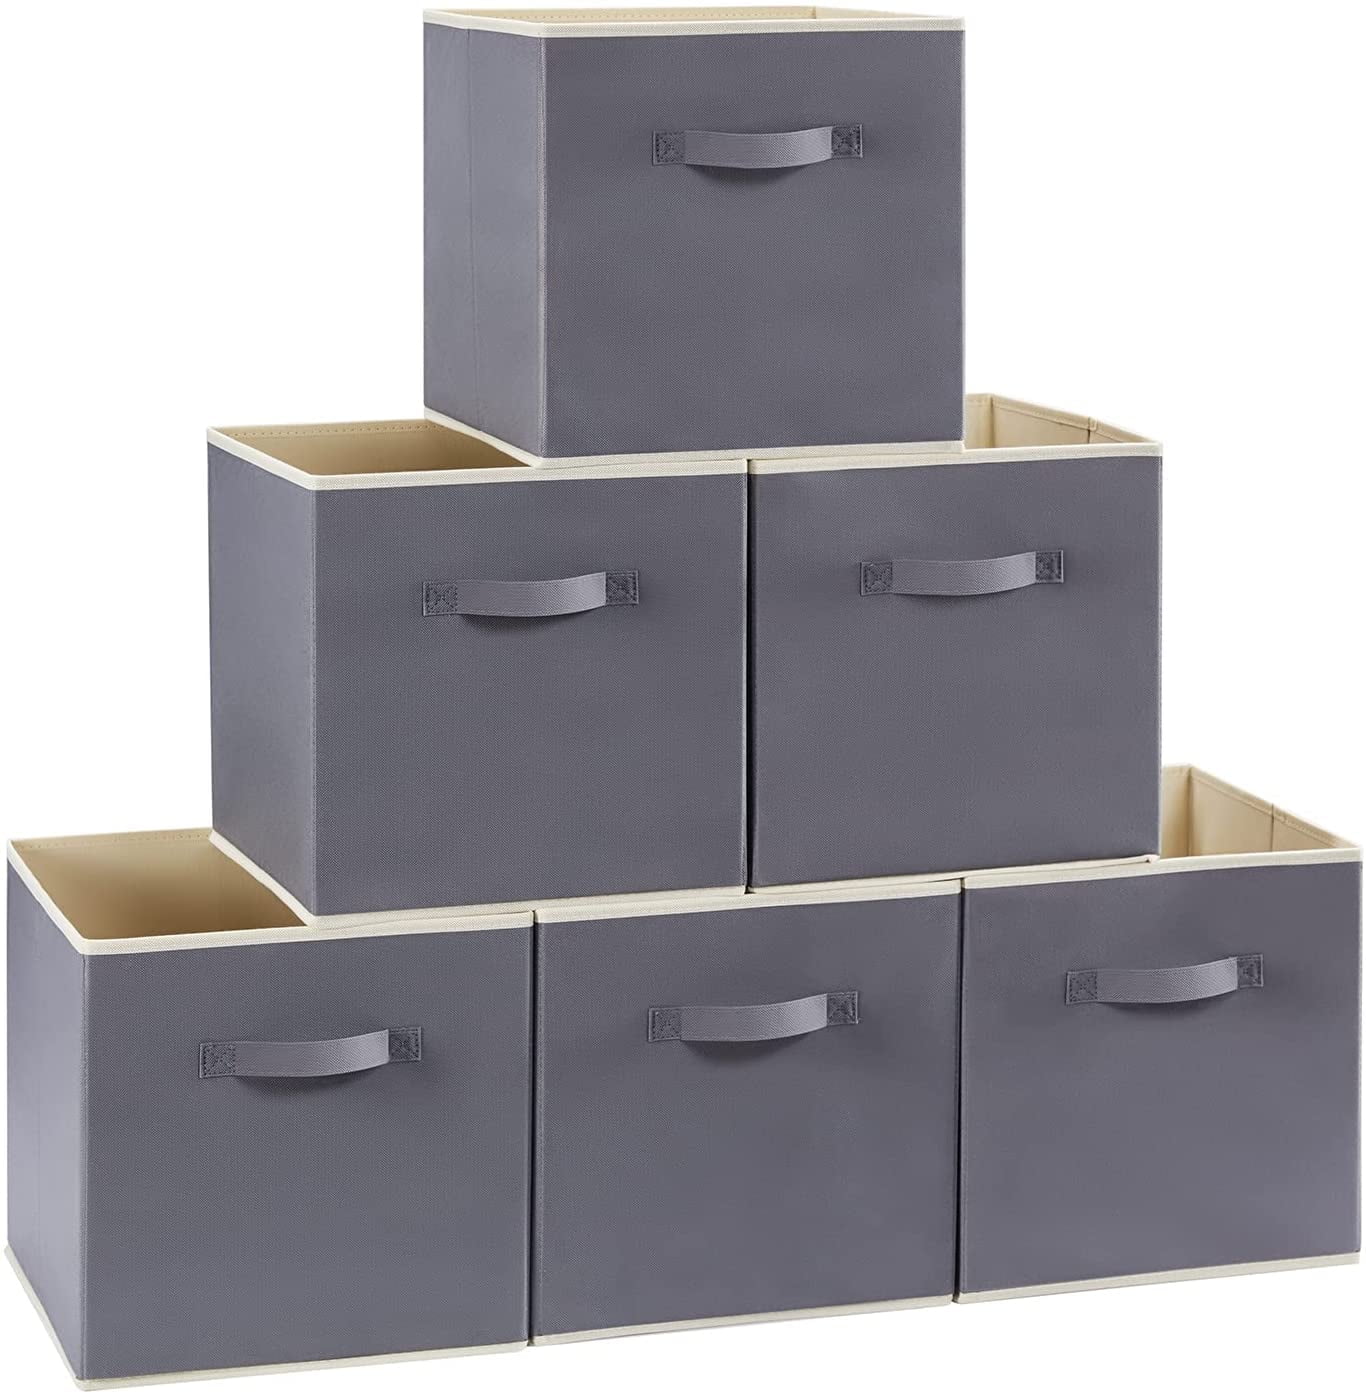 Lakecy 6 Pack Fabric Storage Cubes with Handle, Foldable 11 Inch